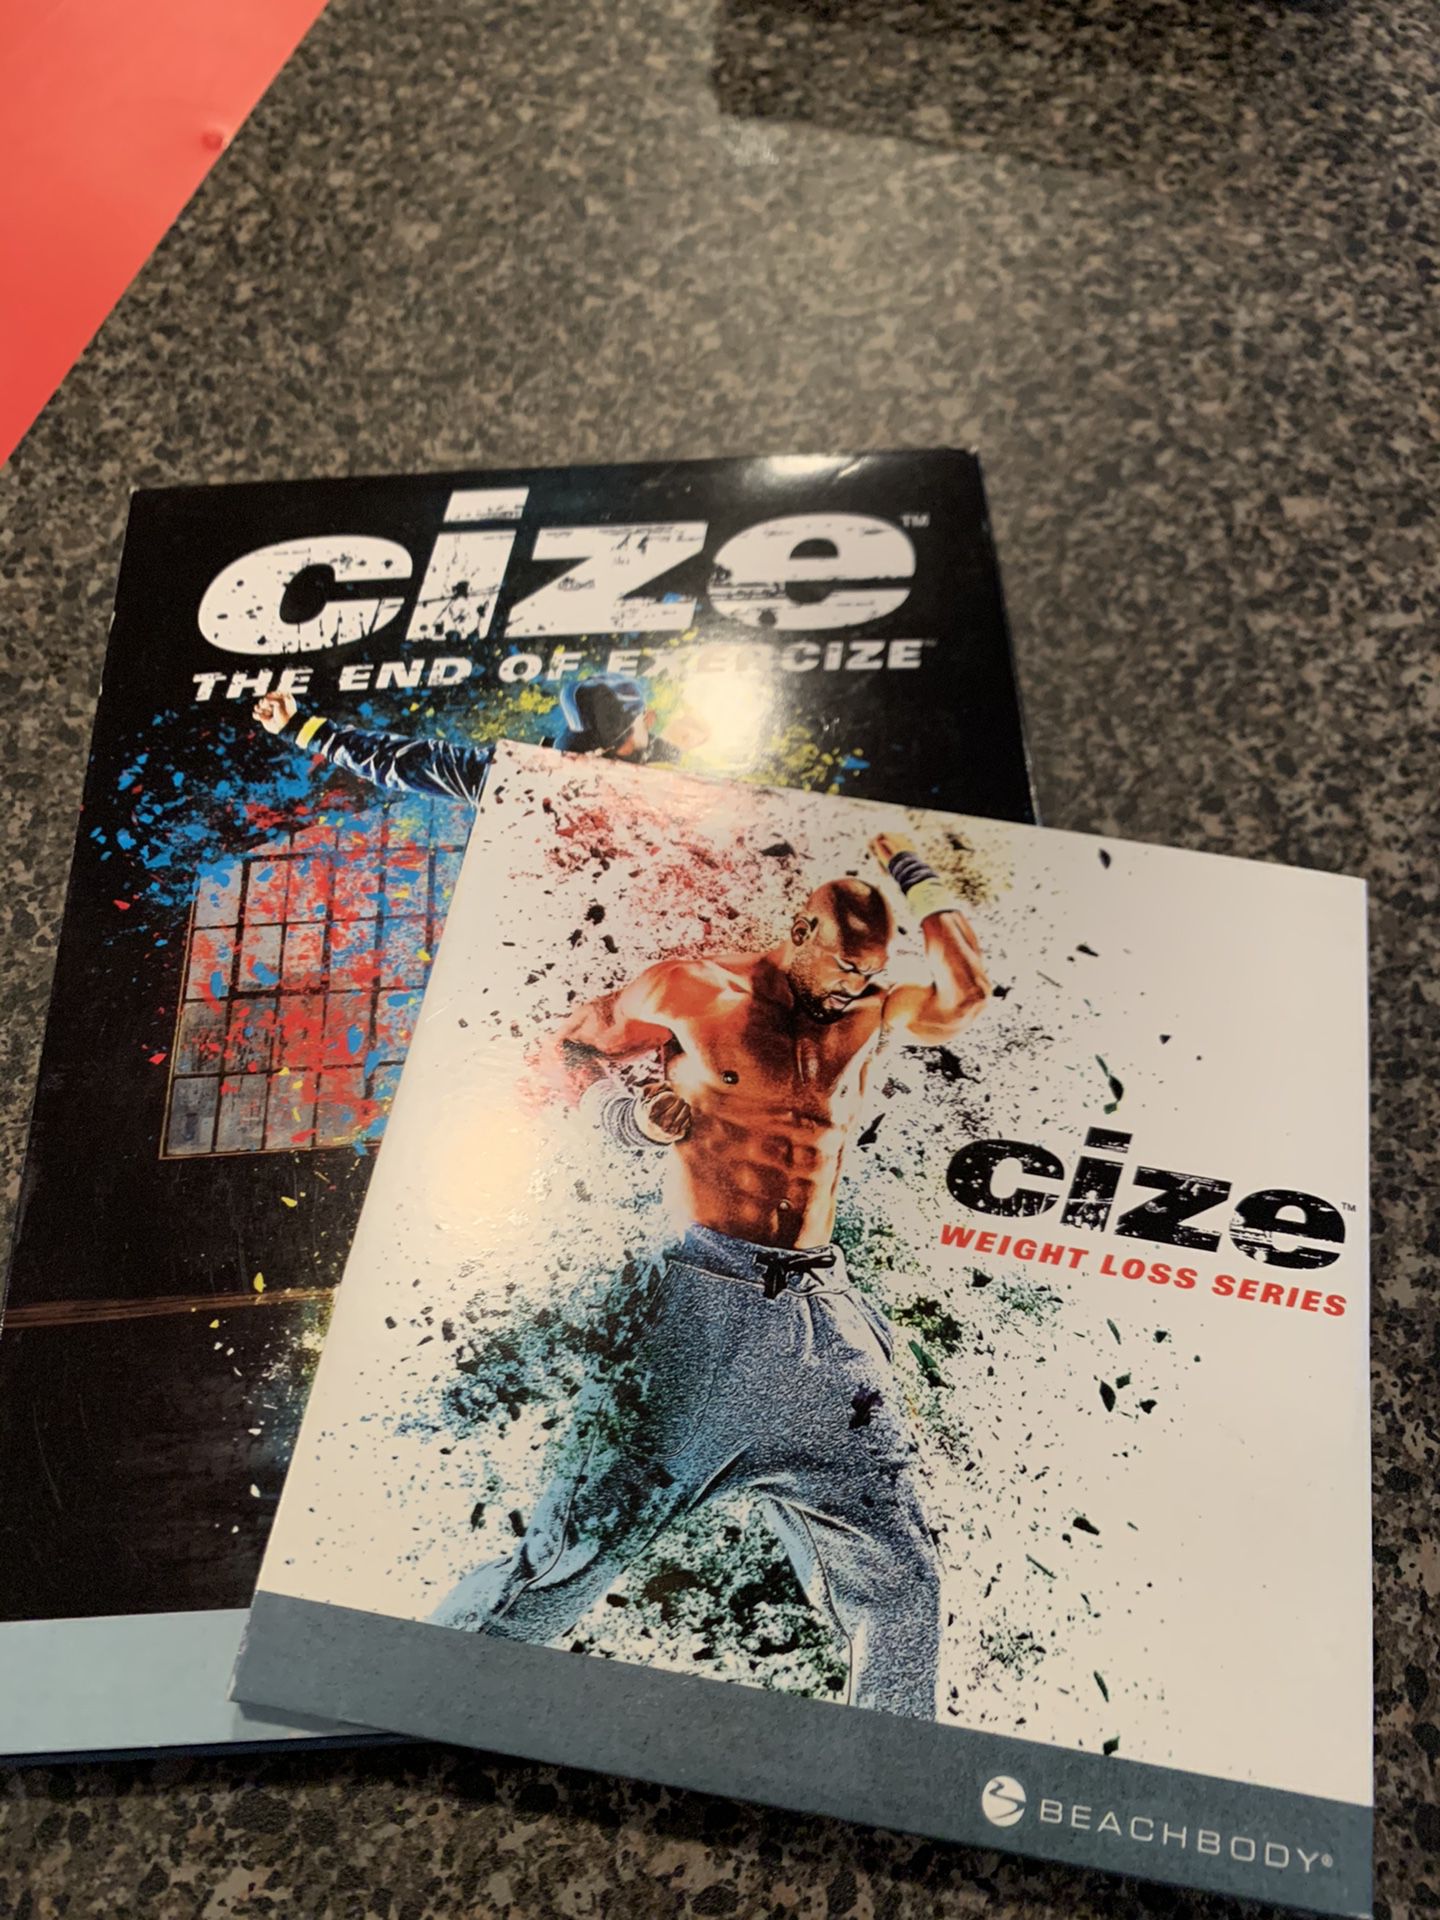 Cize by Shawn T